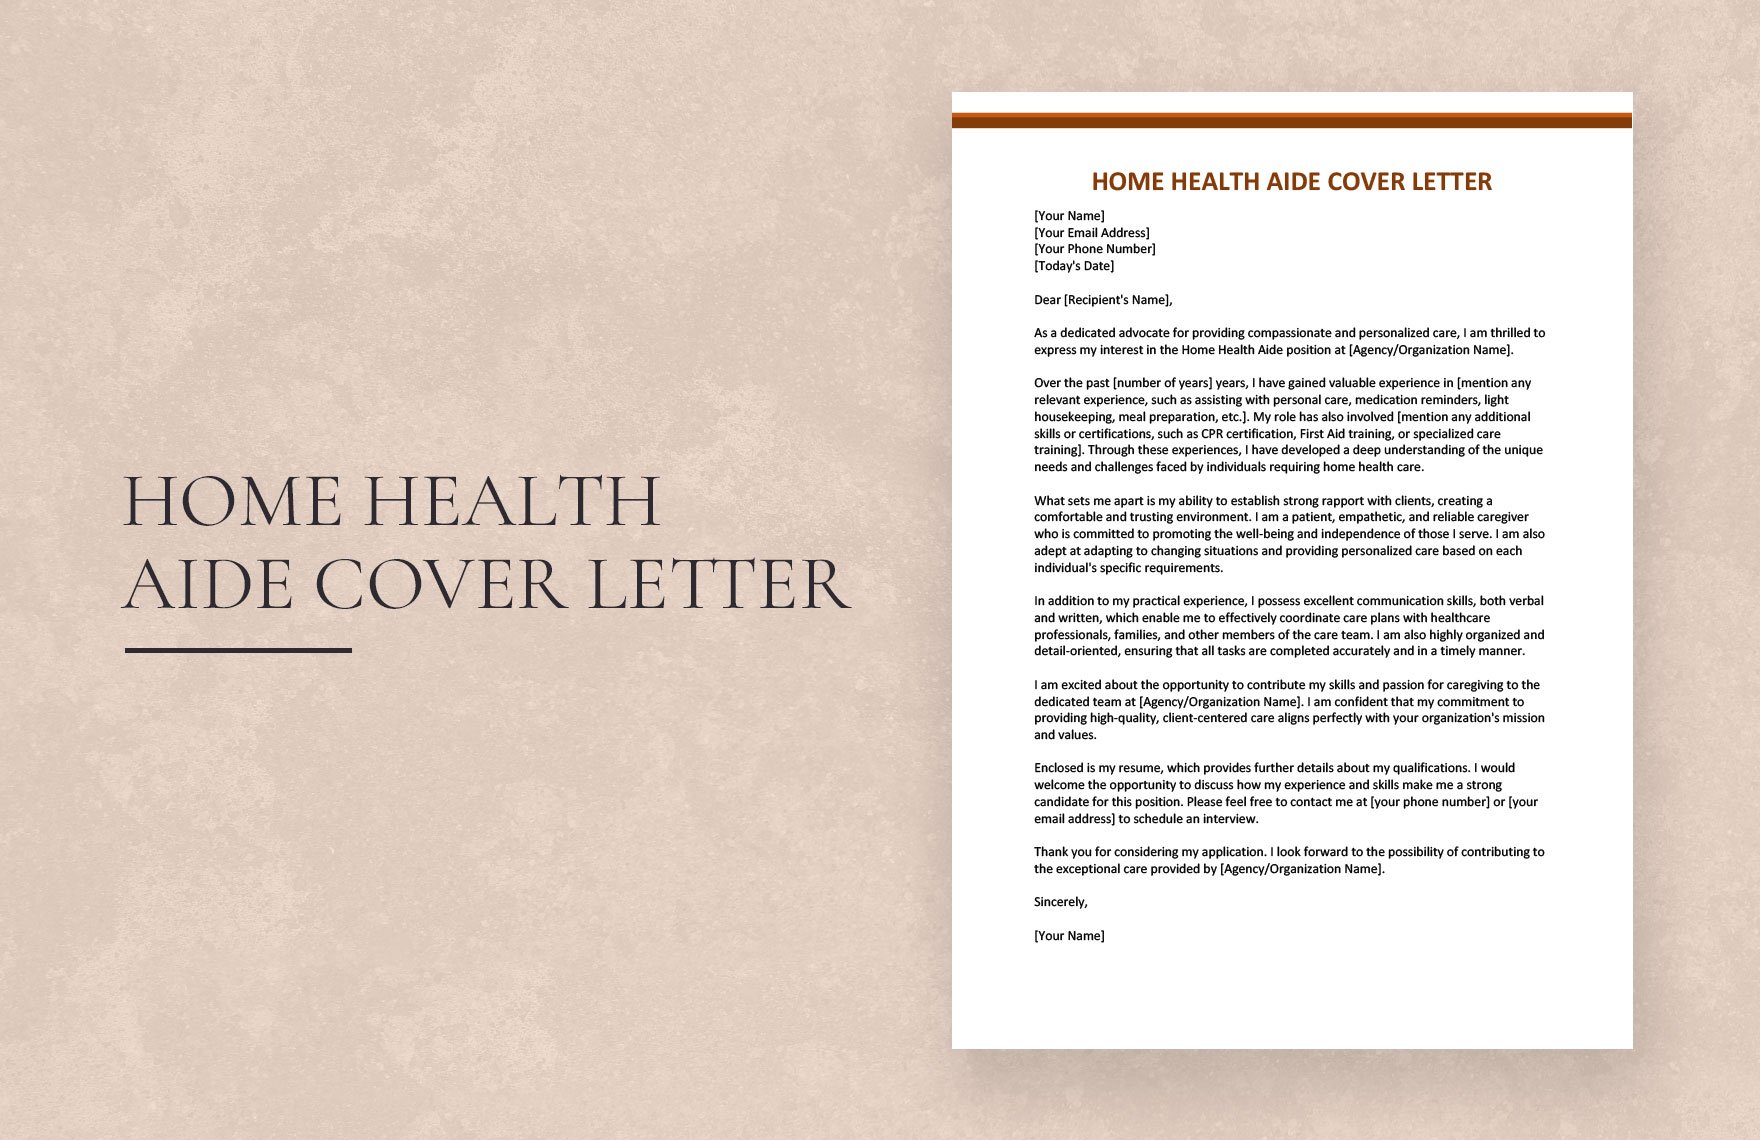 Home Health Aide Cover Letter in Word, Google Docs